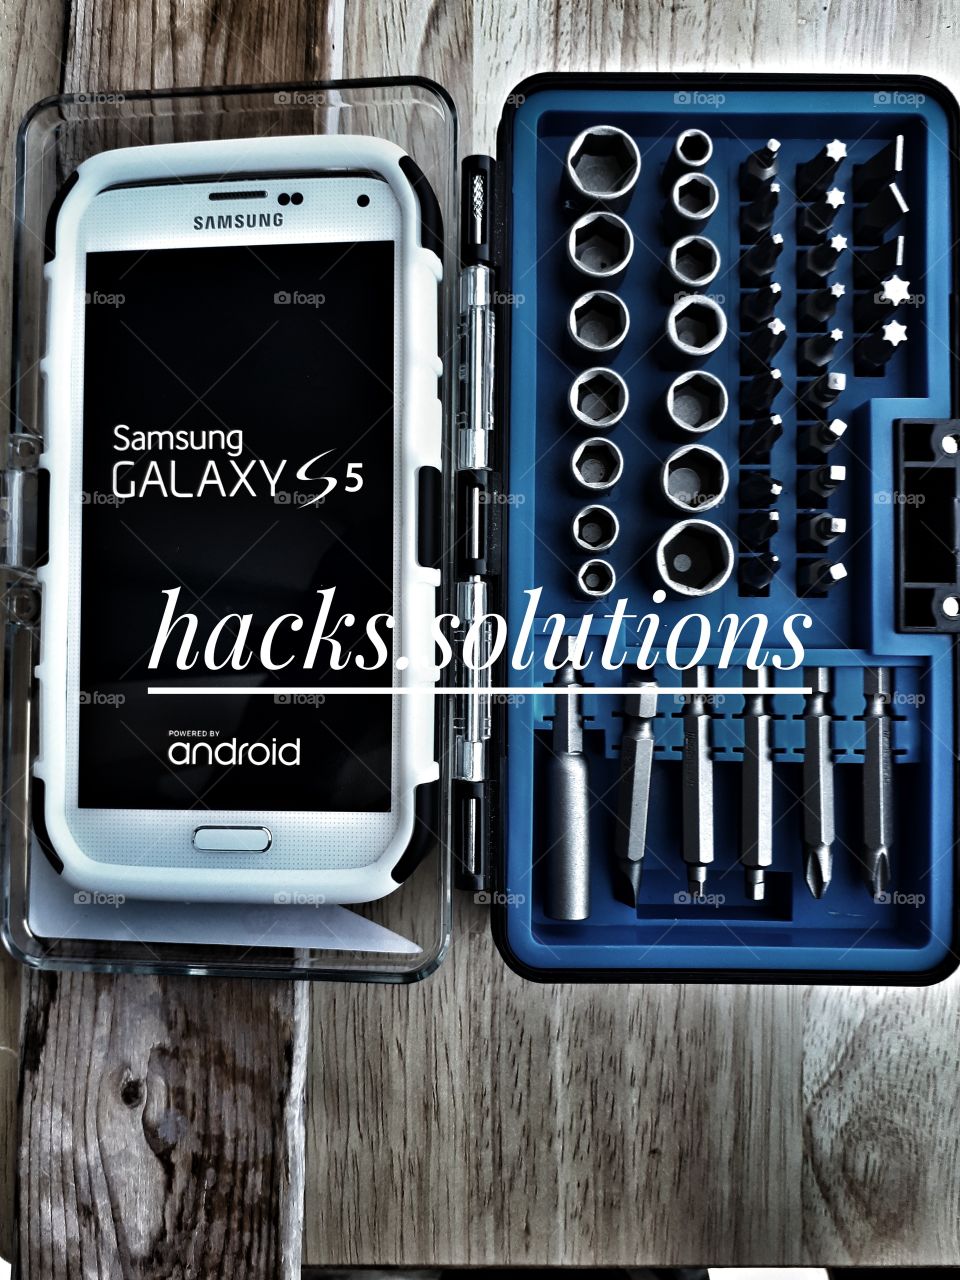 Samsung Galaxy s5 tools  Android smartphone